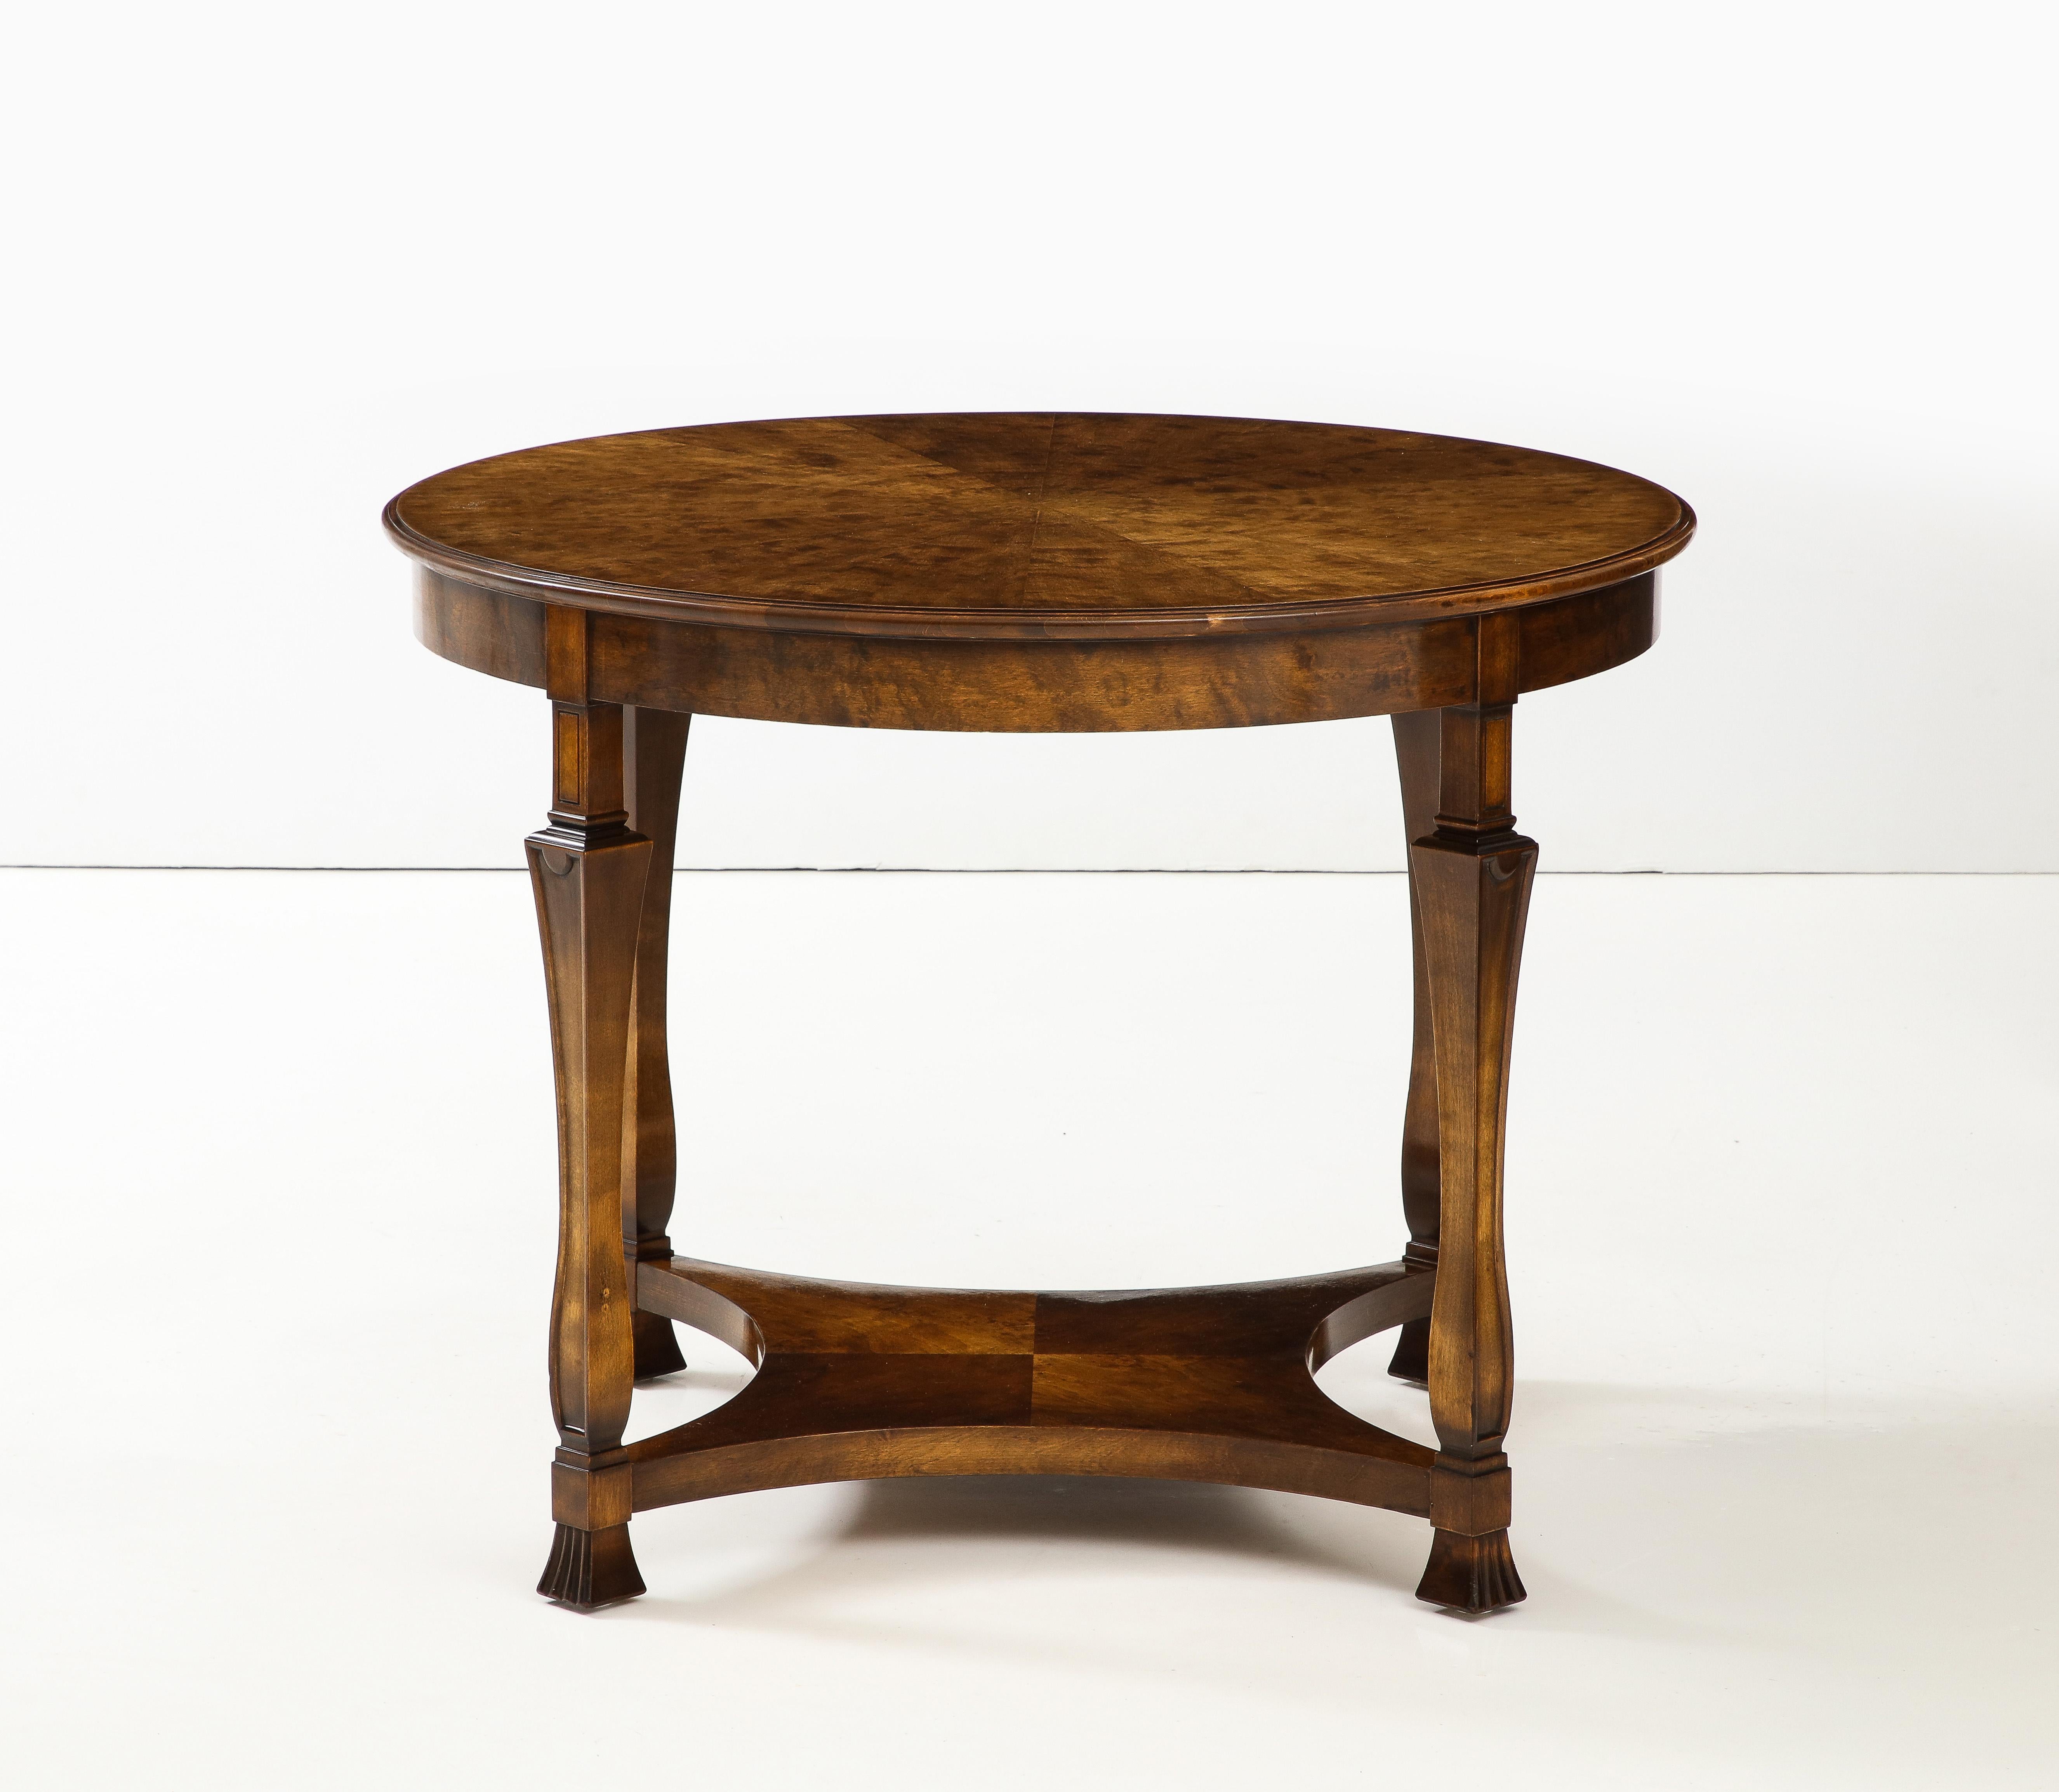 A Swedish Grace birchwood and stained side table, Designed by Carl Malmsten, circa 1940s, with a circular sunburst veneered top above a conforming apron raised on square tapered and channeled legs ending with flared feet joined by a concave